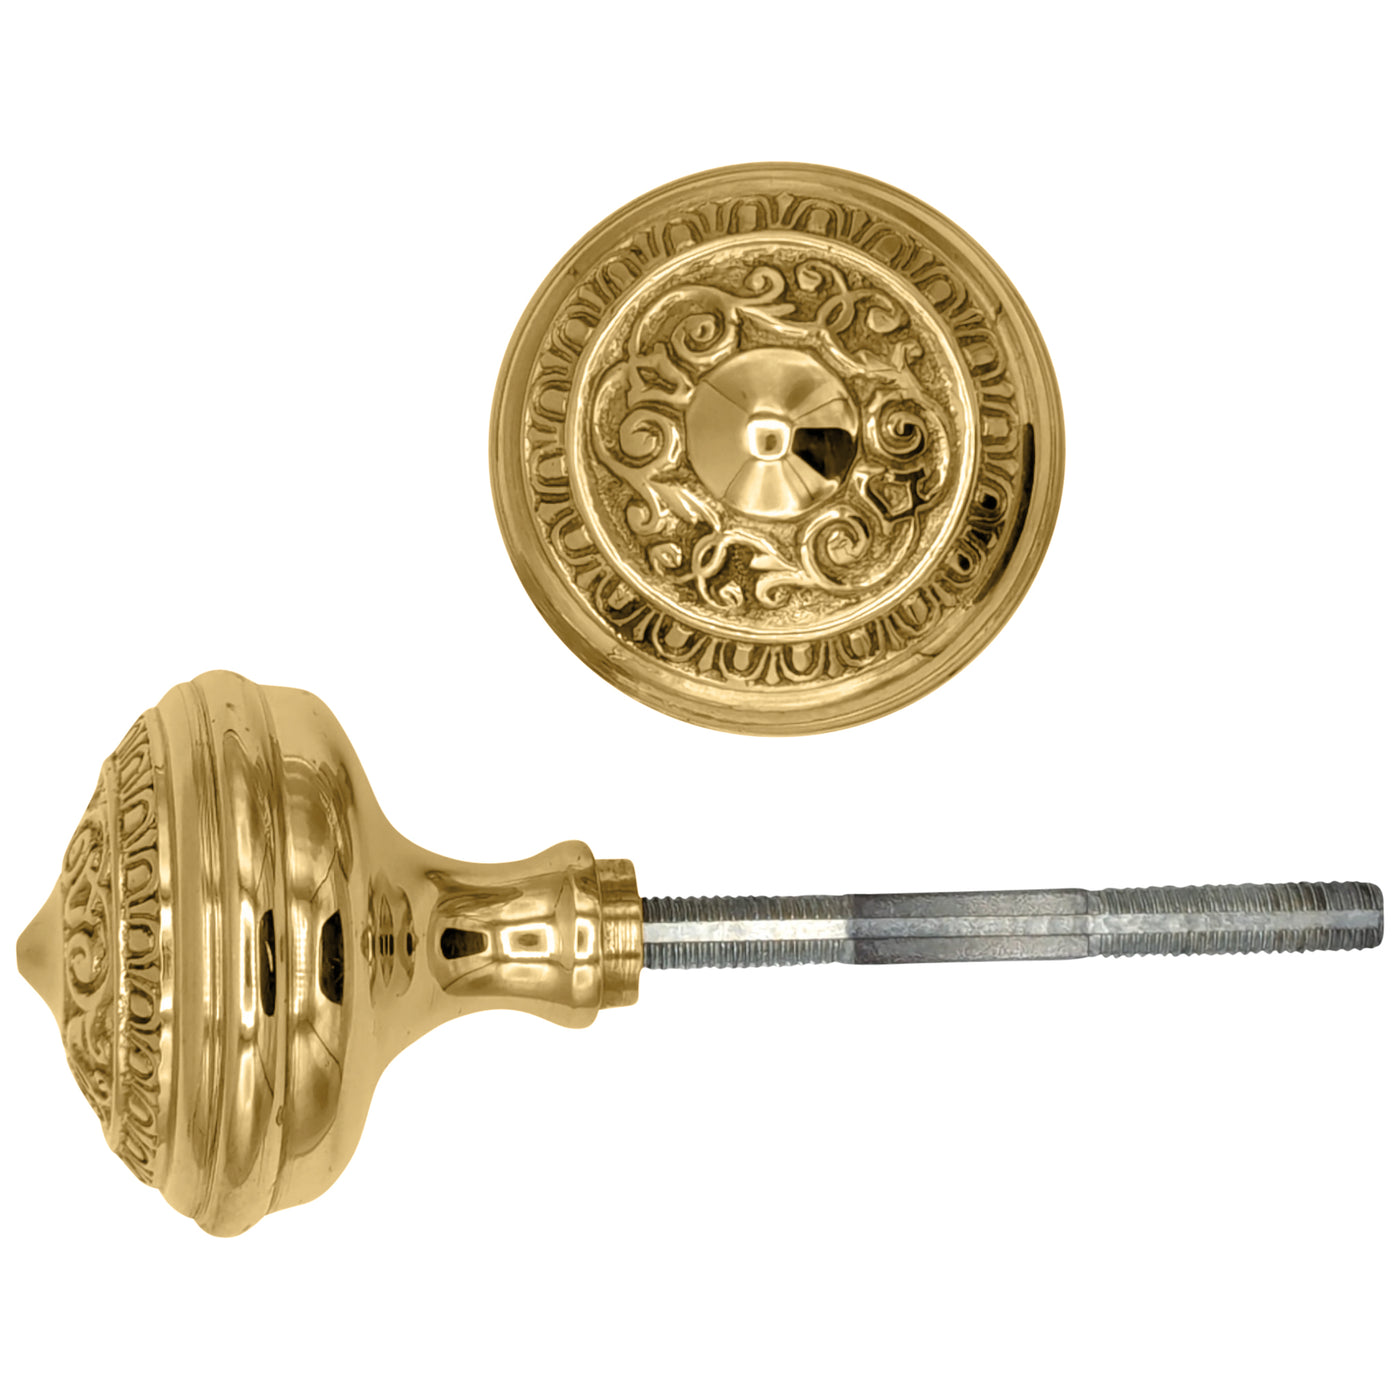 Egg & Dart Solid Brass Spare Door Knob Set (Several Finishes Available)